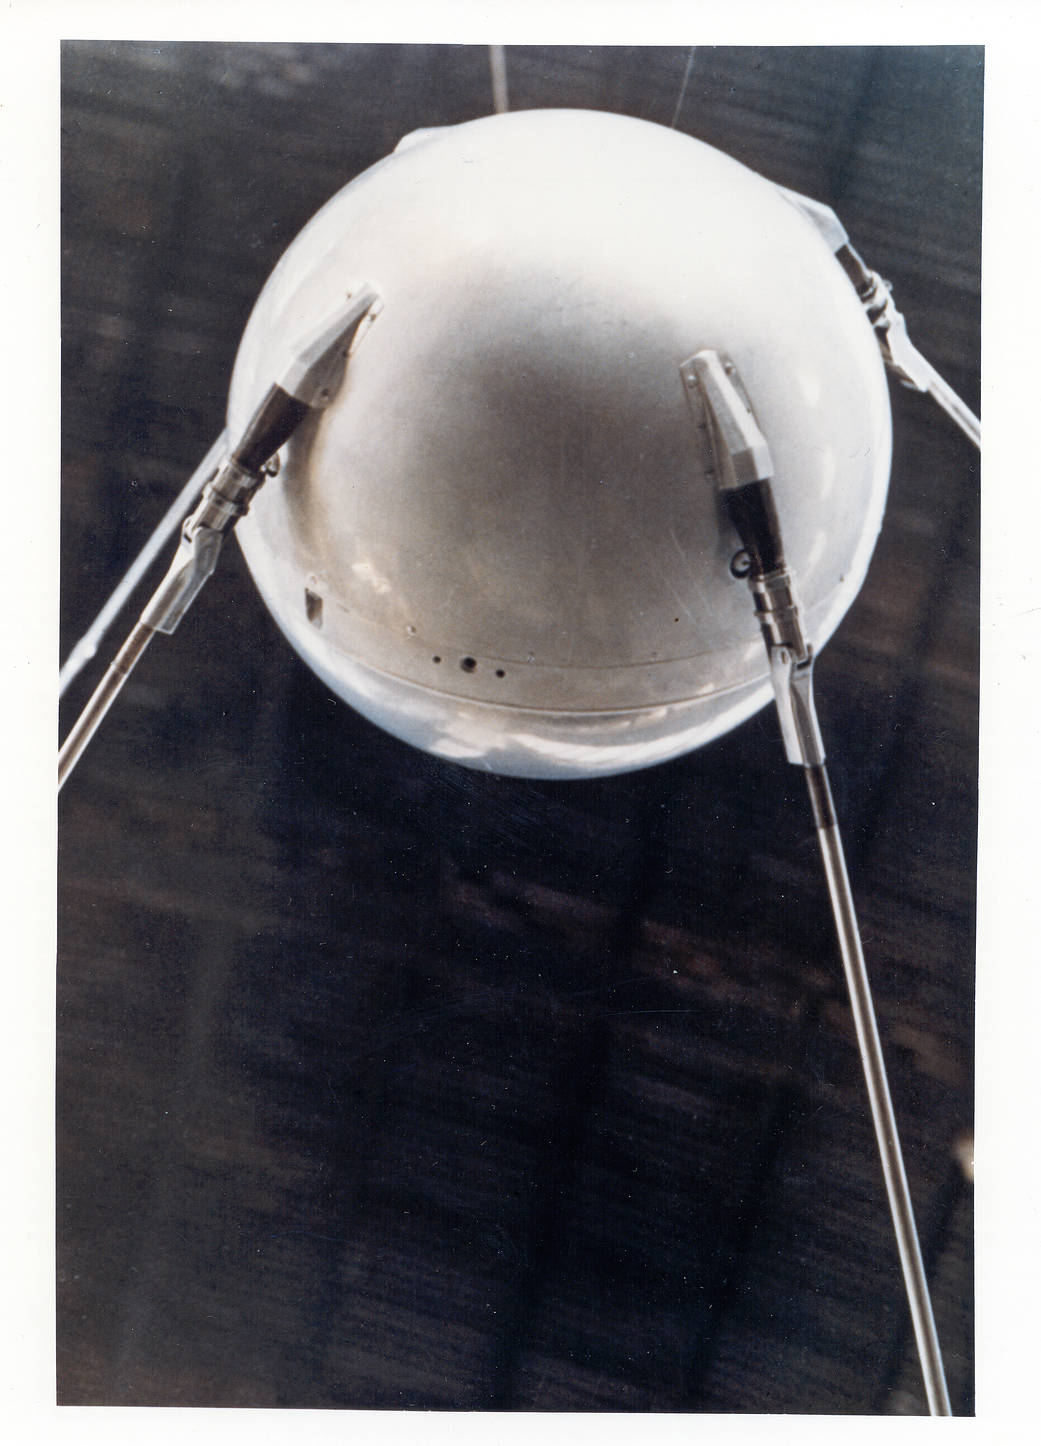 History changed on Oct. 4, 1957, when the Soviet Union successfully launched Sputnik from the Baikonur Cosmodrome in Kazakhstan. The world's first artificial satellite was about the size of a beach ball, about 23 inches in diameter and weighing less than 190 pounds. (Courtesy NASA)